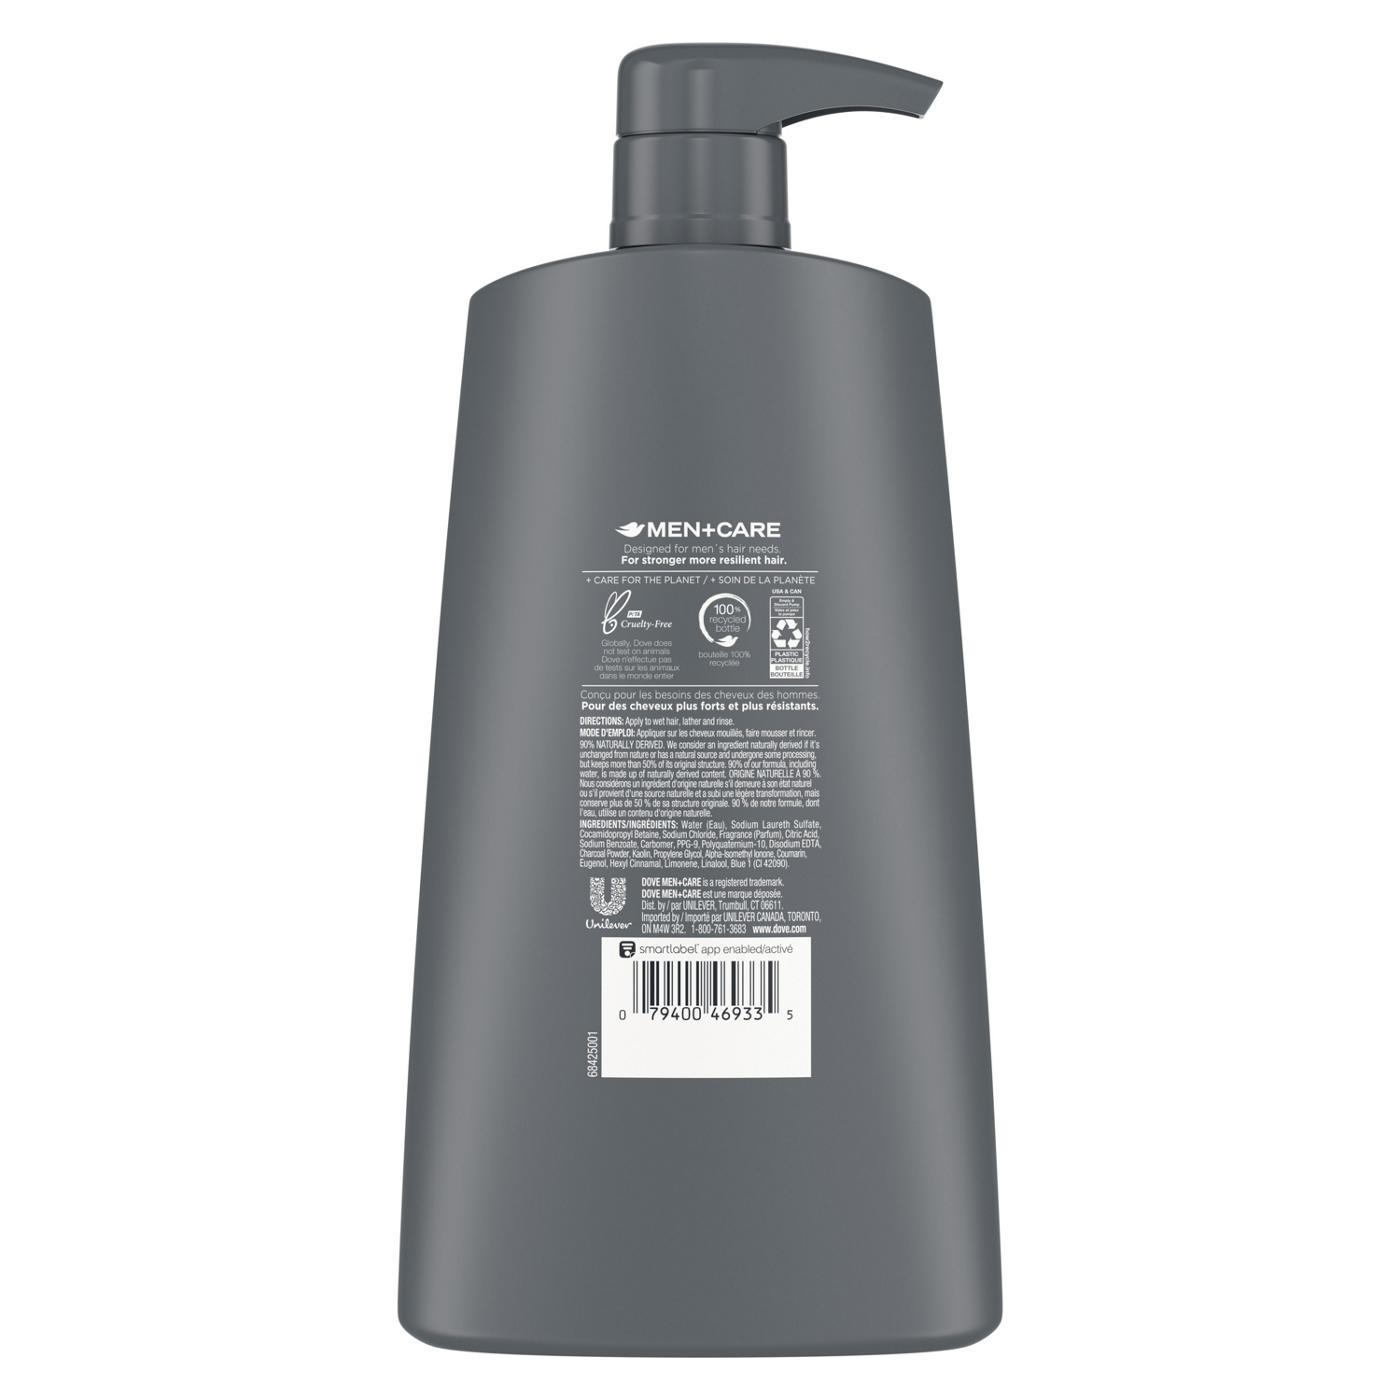 Dove Men+Care Shampoo - Charcoal + Clay; image 4 of 5